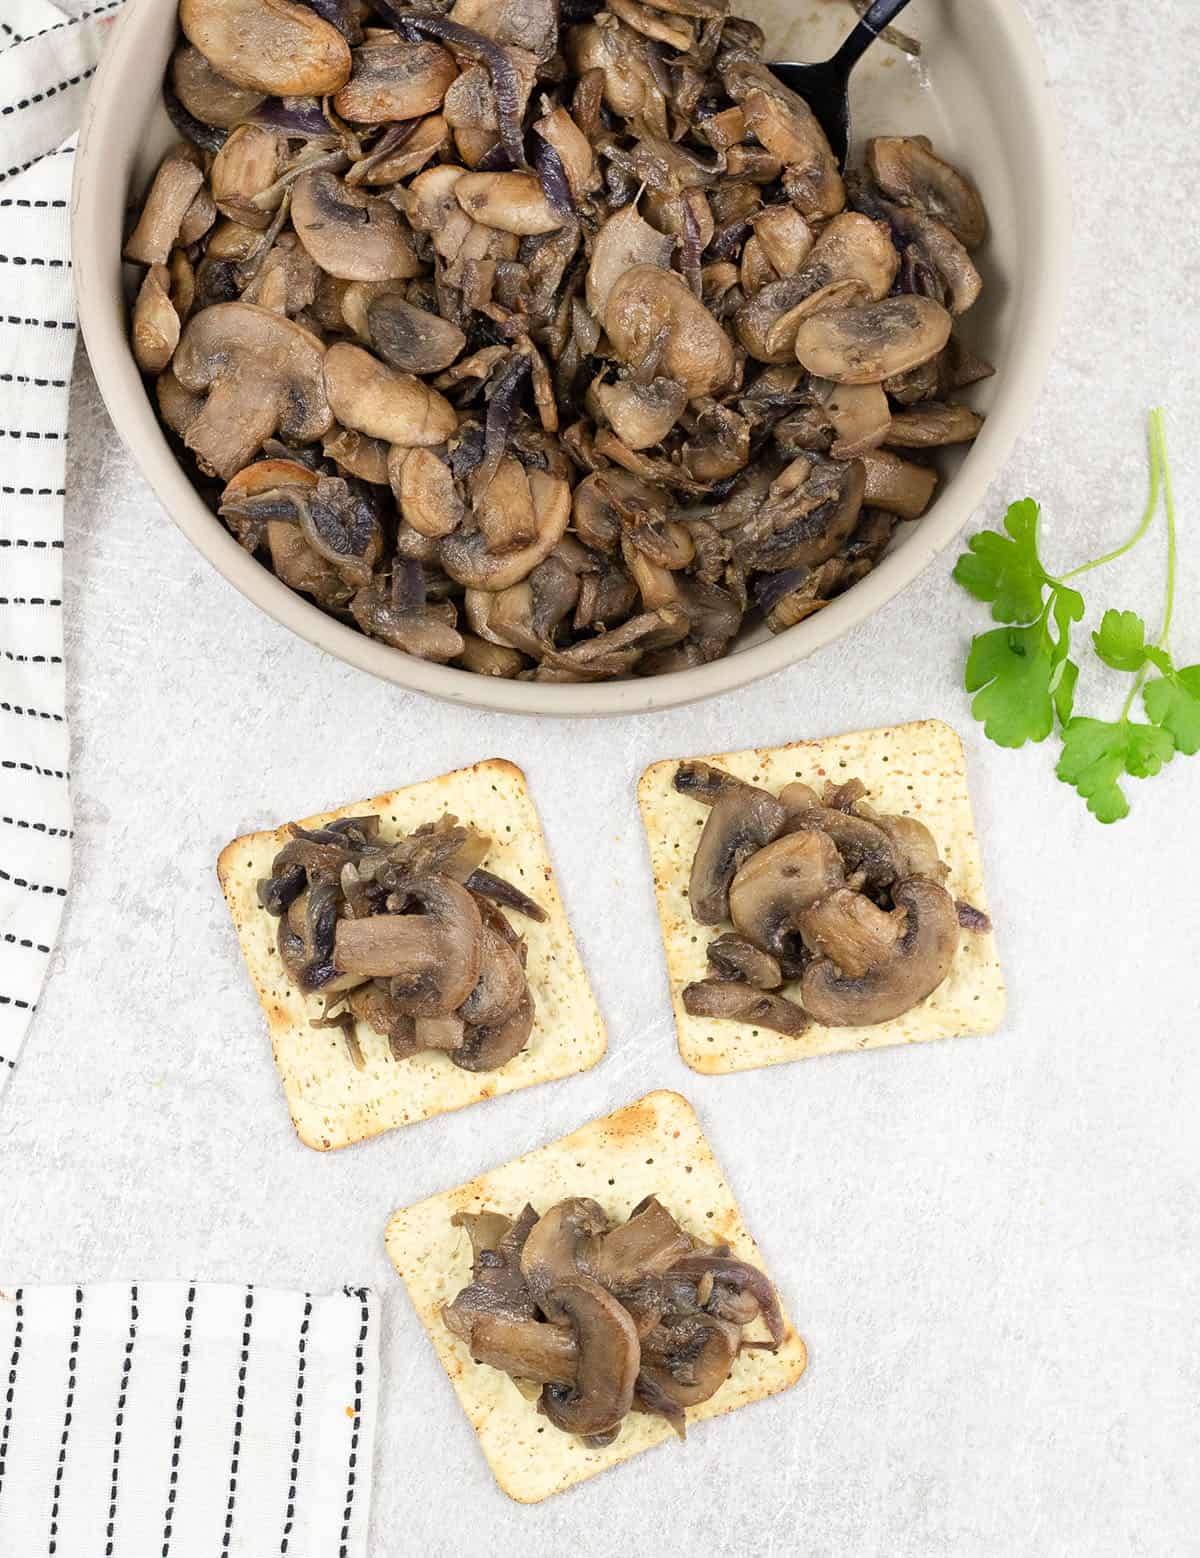 Caramelized mushrooms and onions on some crackers.